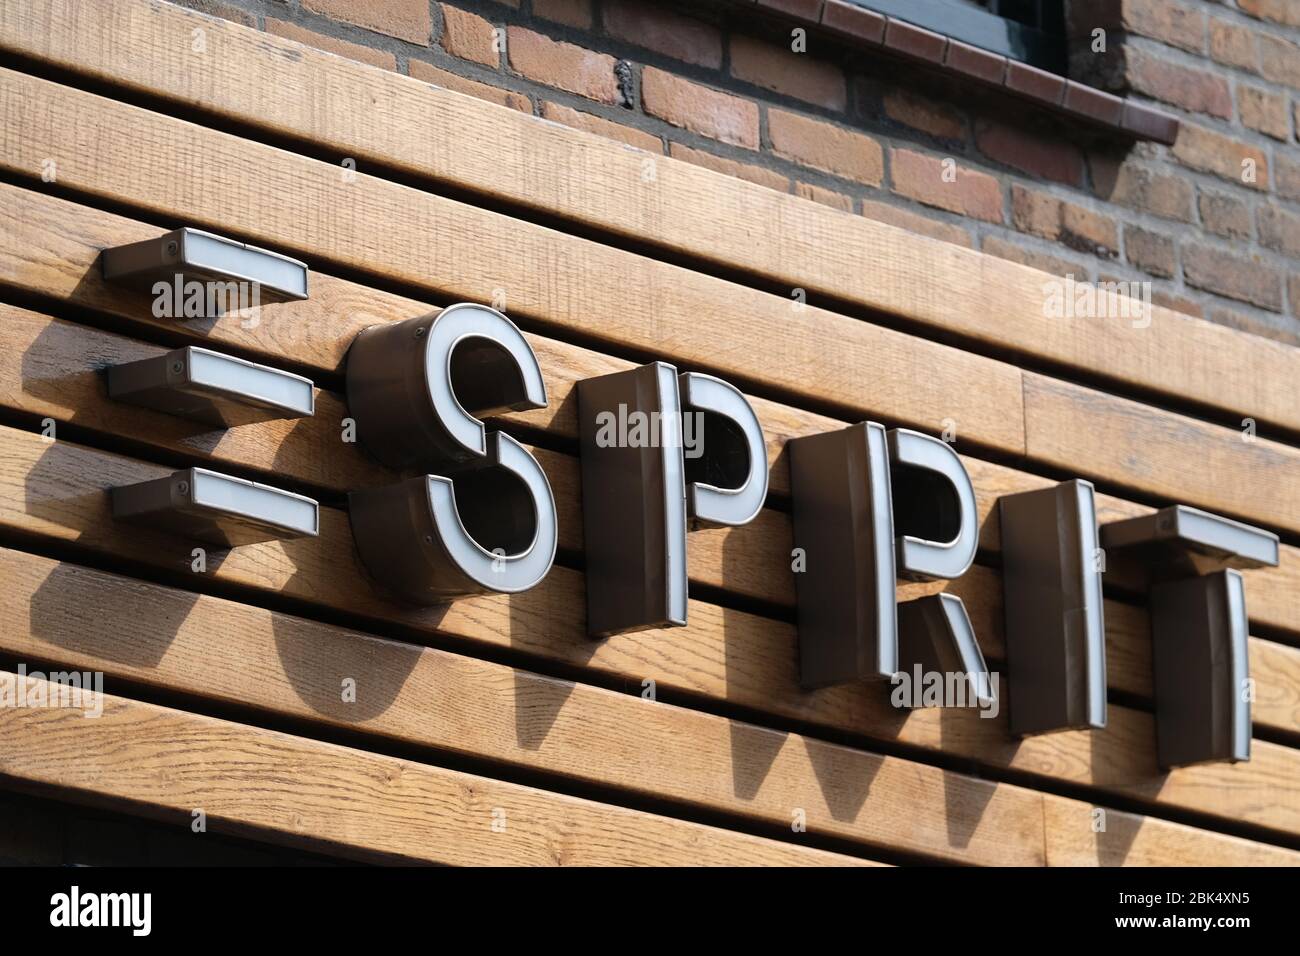 A logo of Esprit is pictured outside its clothing store on April 27, 2020  in Katwijk, Netherlands. The Hong Kong-listed apparel group Esprit will  close its 56 stores in Asia, excluding those